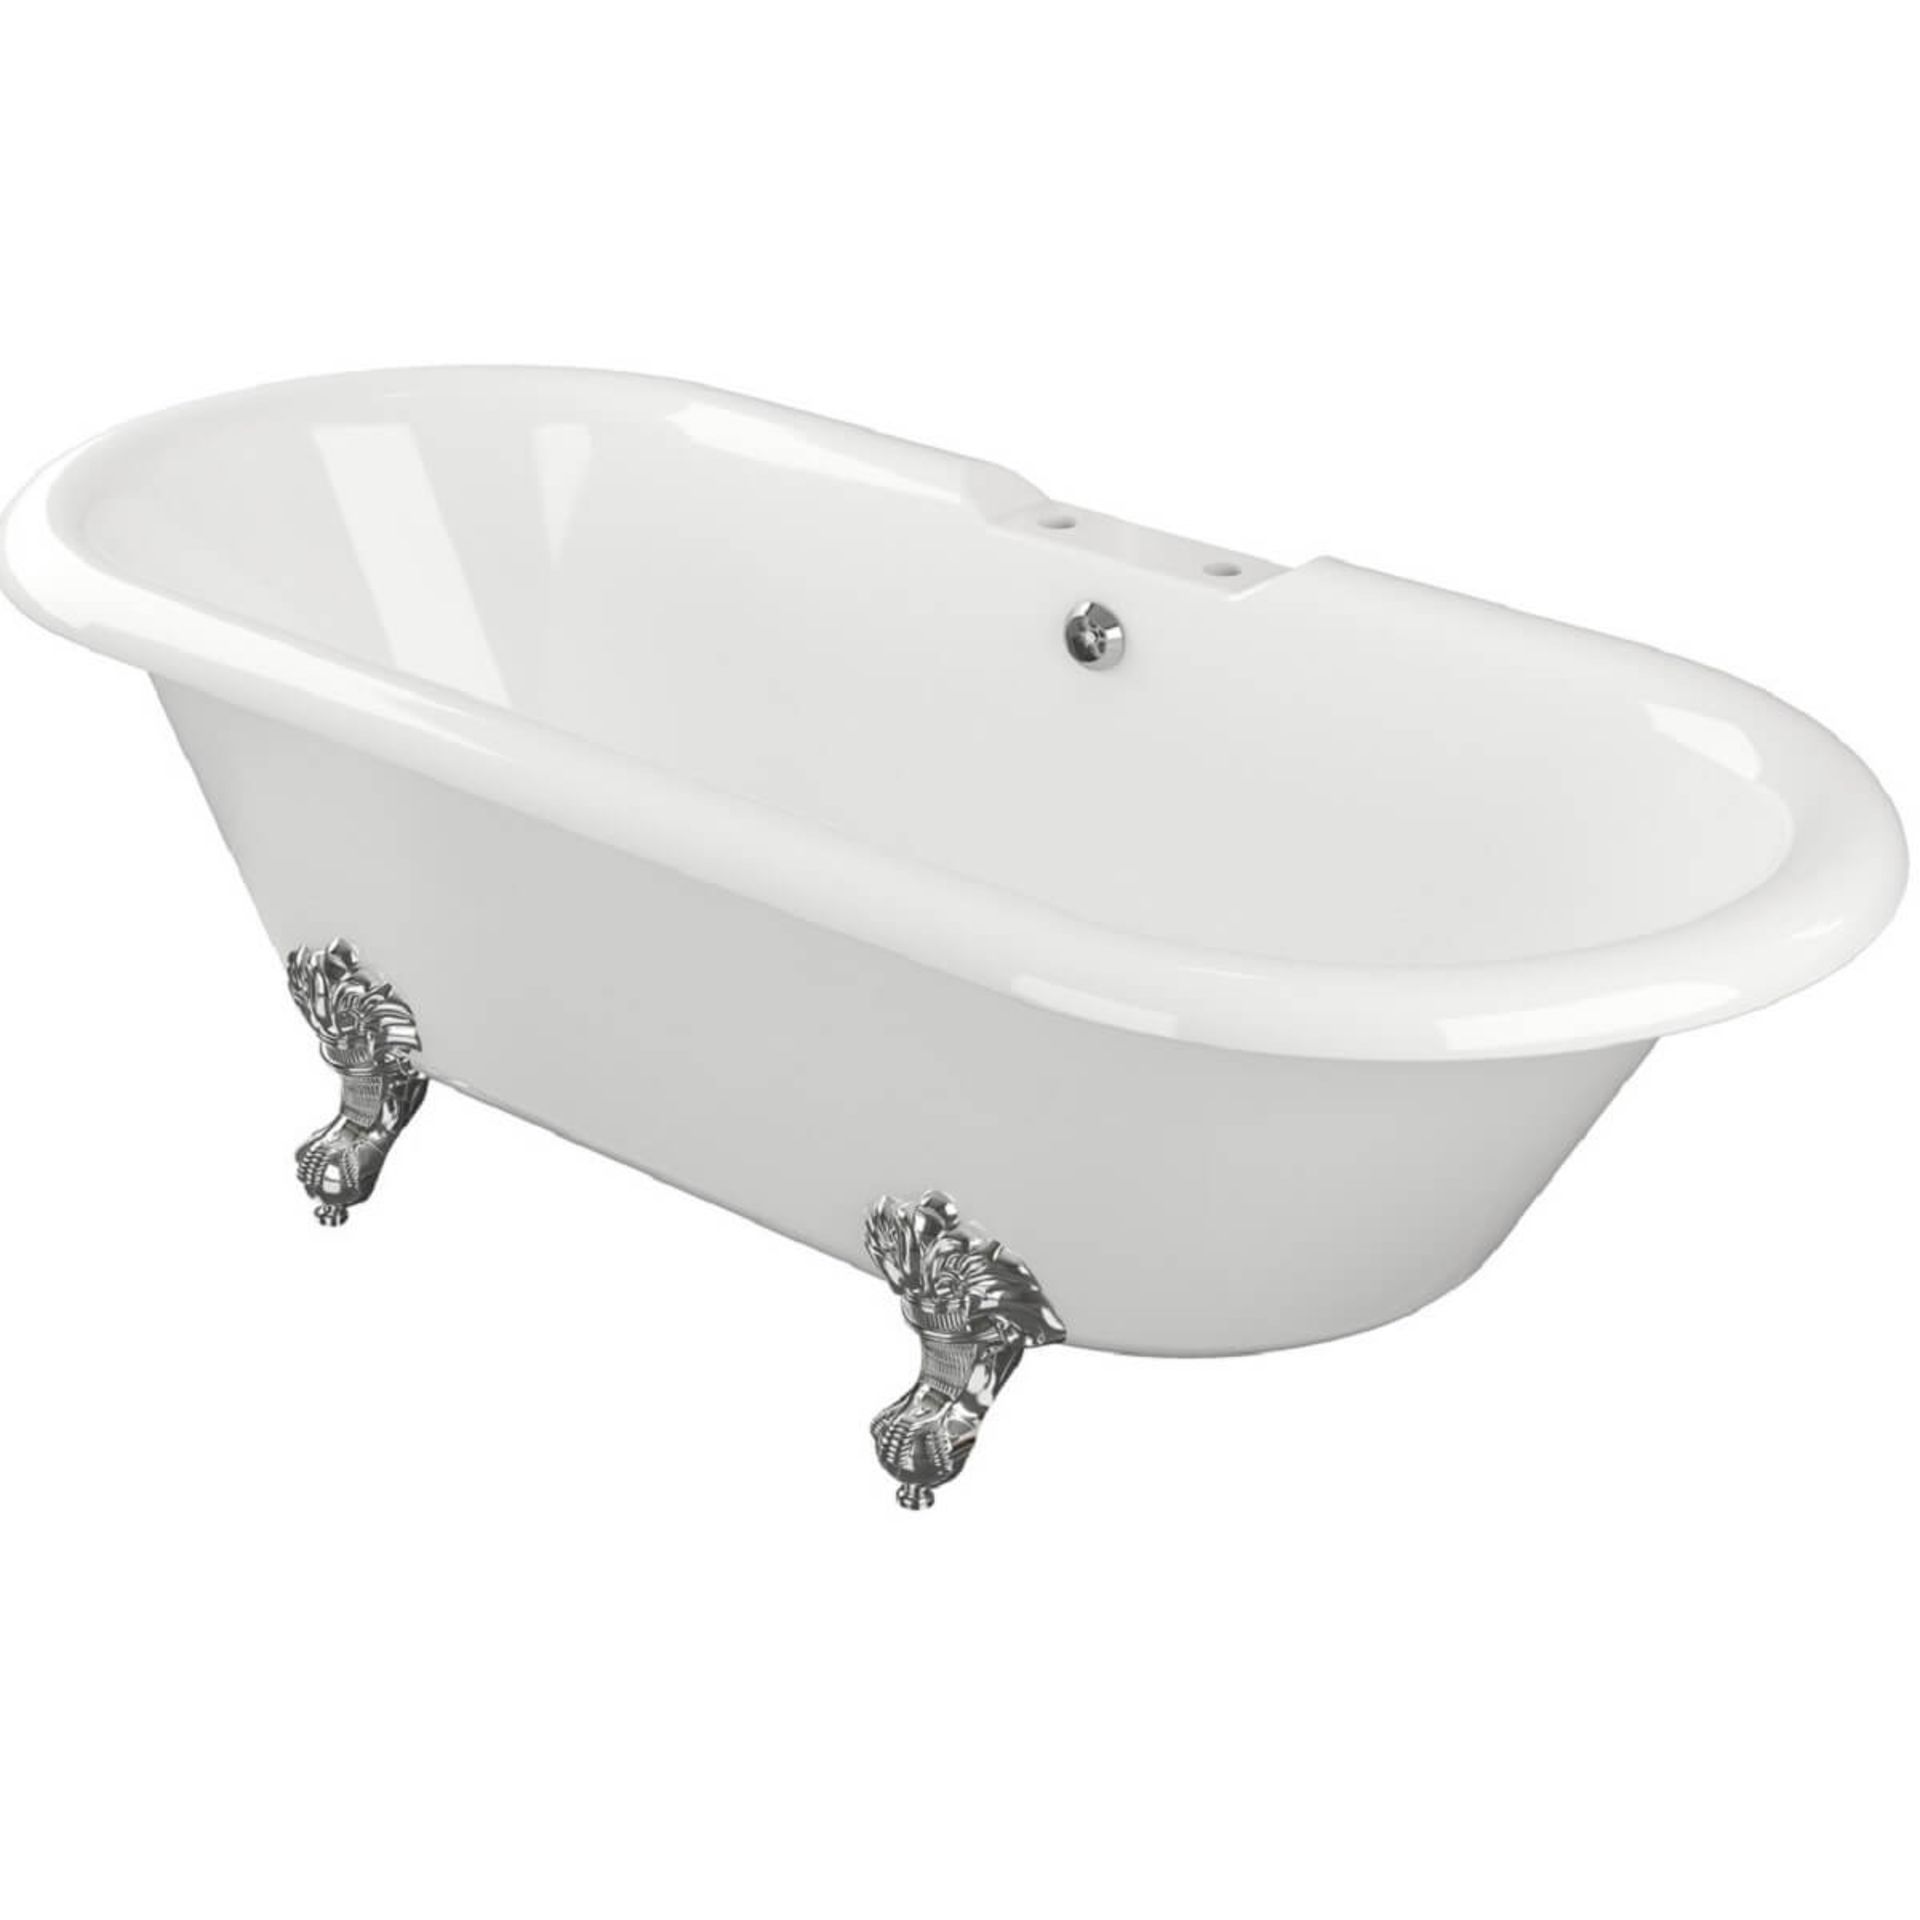 New (Aa4) 1690x740x620mm Richmond White Roller Top Freestanding Bath With Chrome Ball Feet. A... - Image 2 of 2